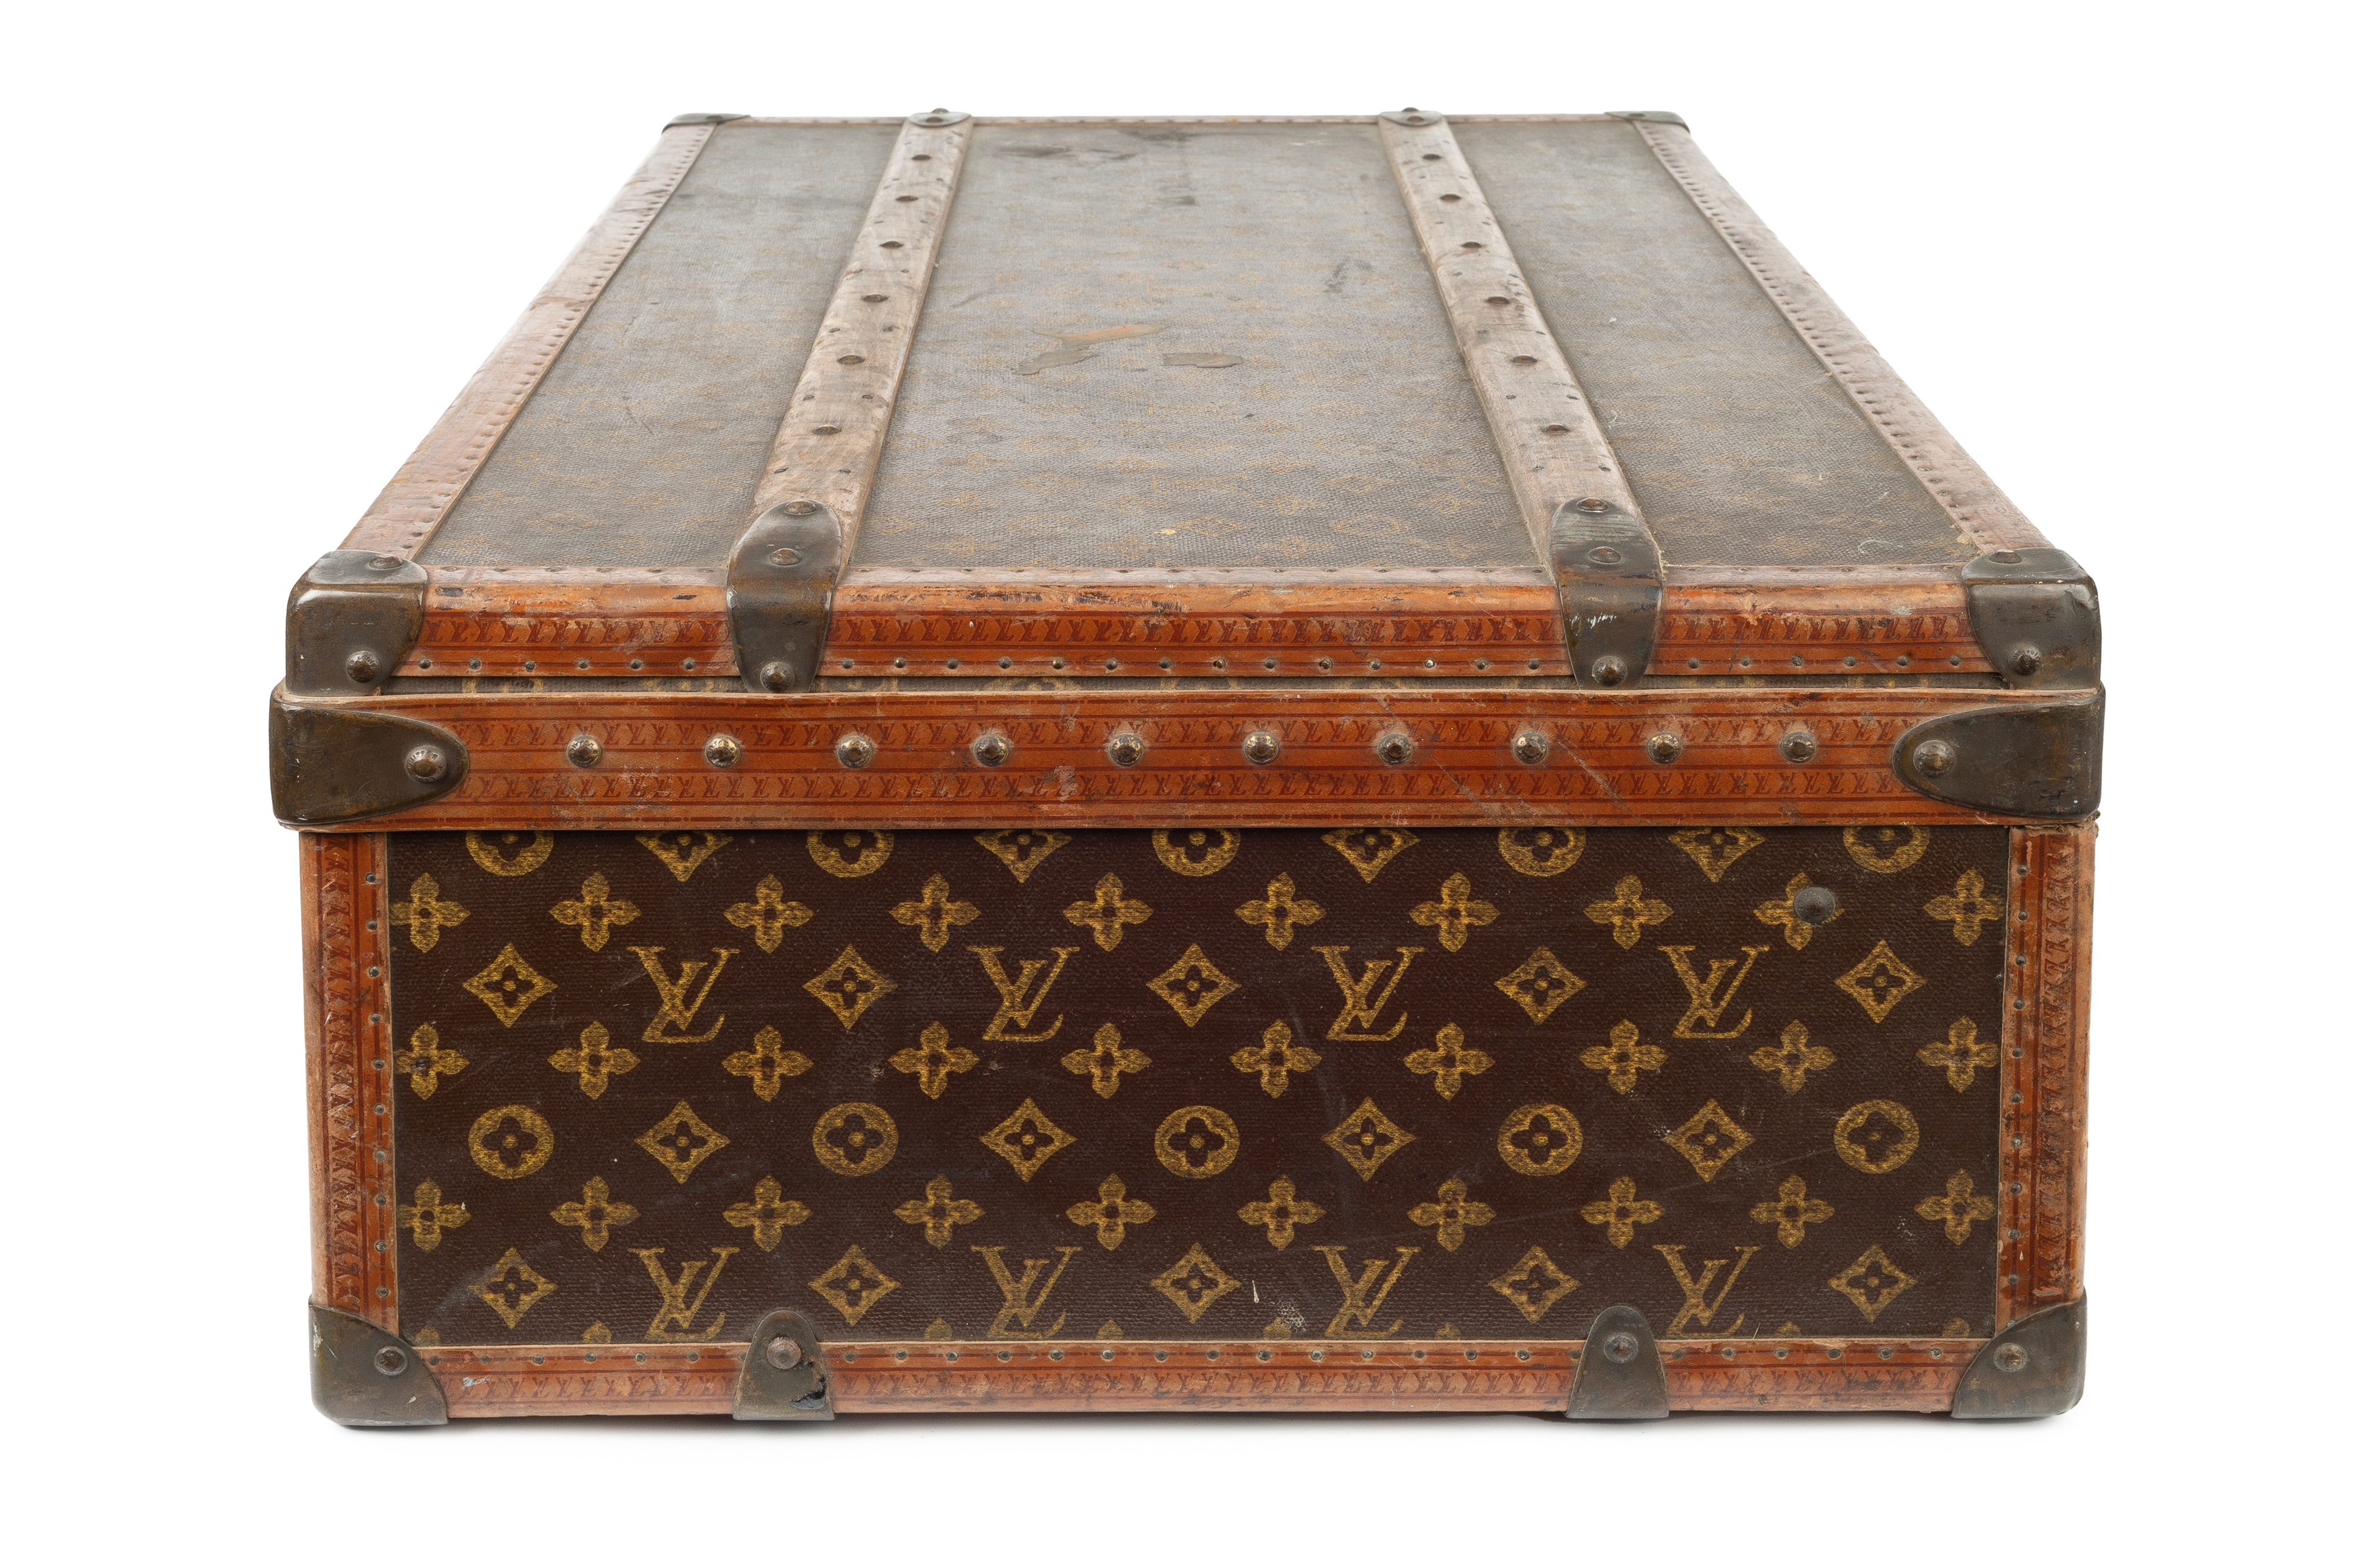 Louis Vuitton Leather Fashion Accessories for Sale in Online Auctions